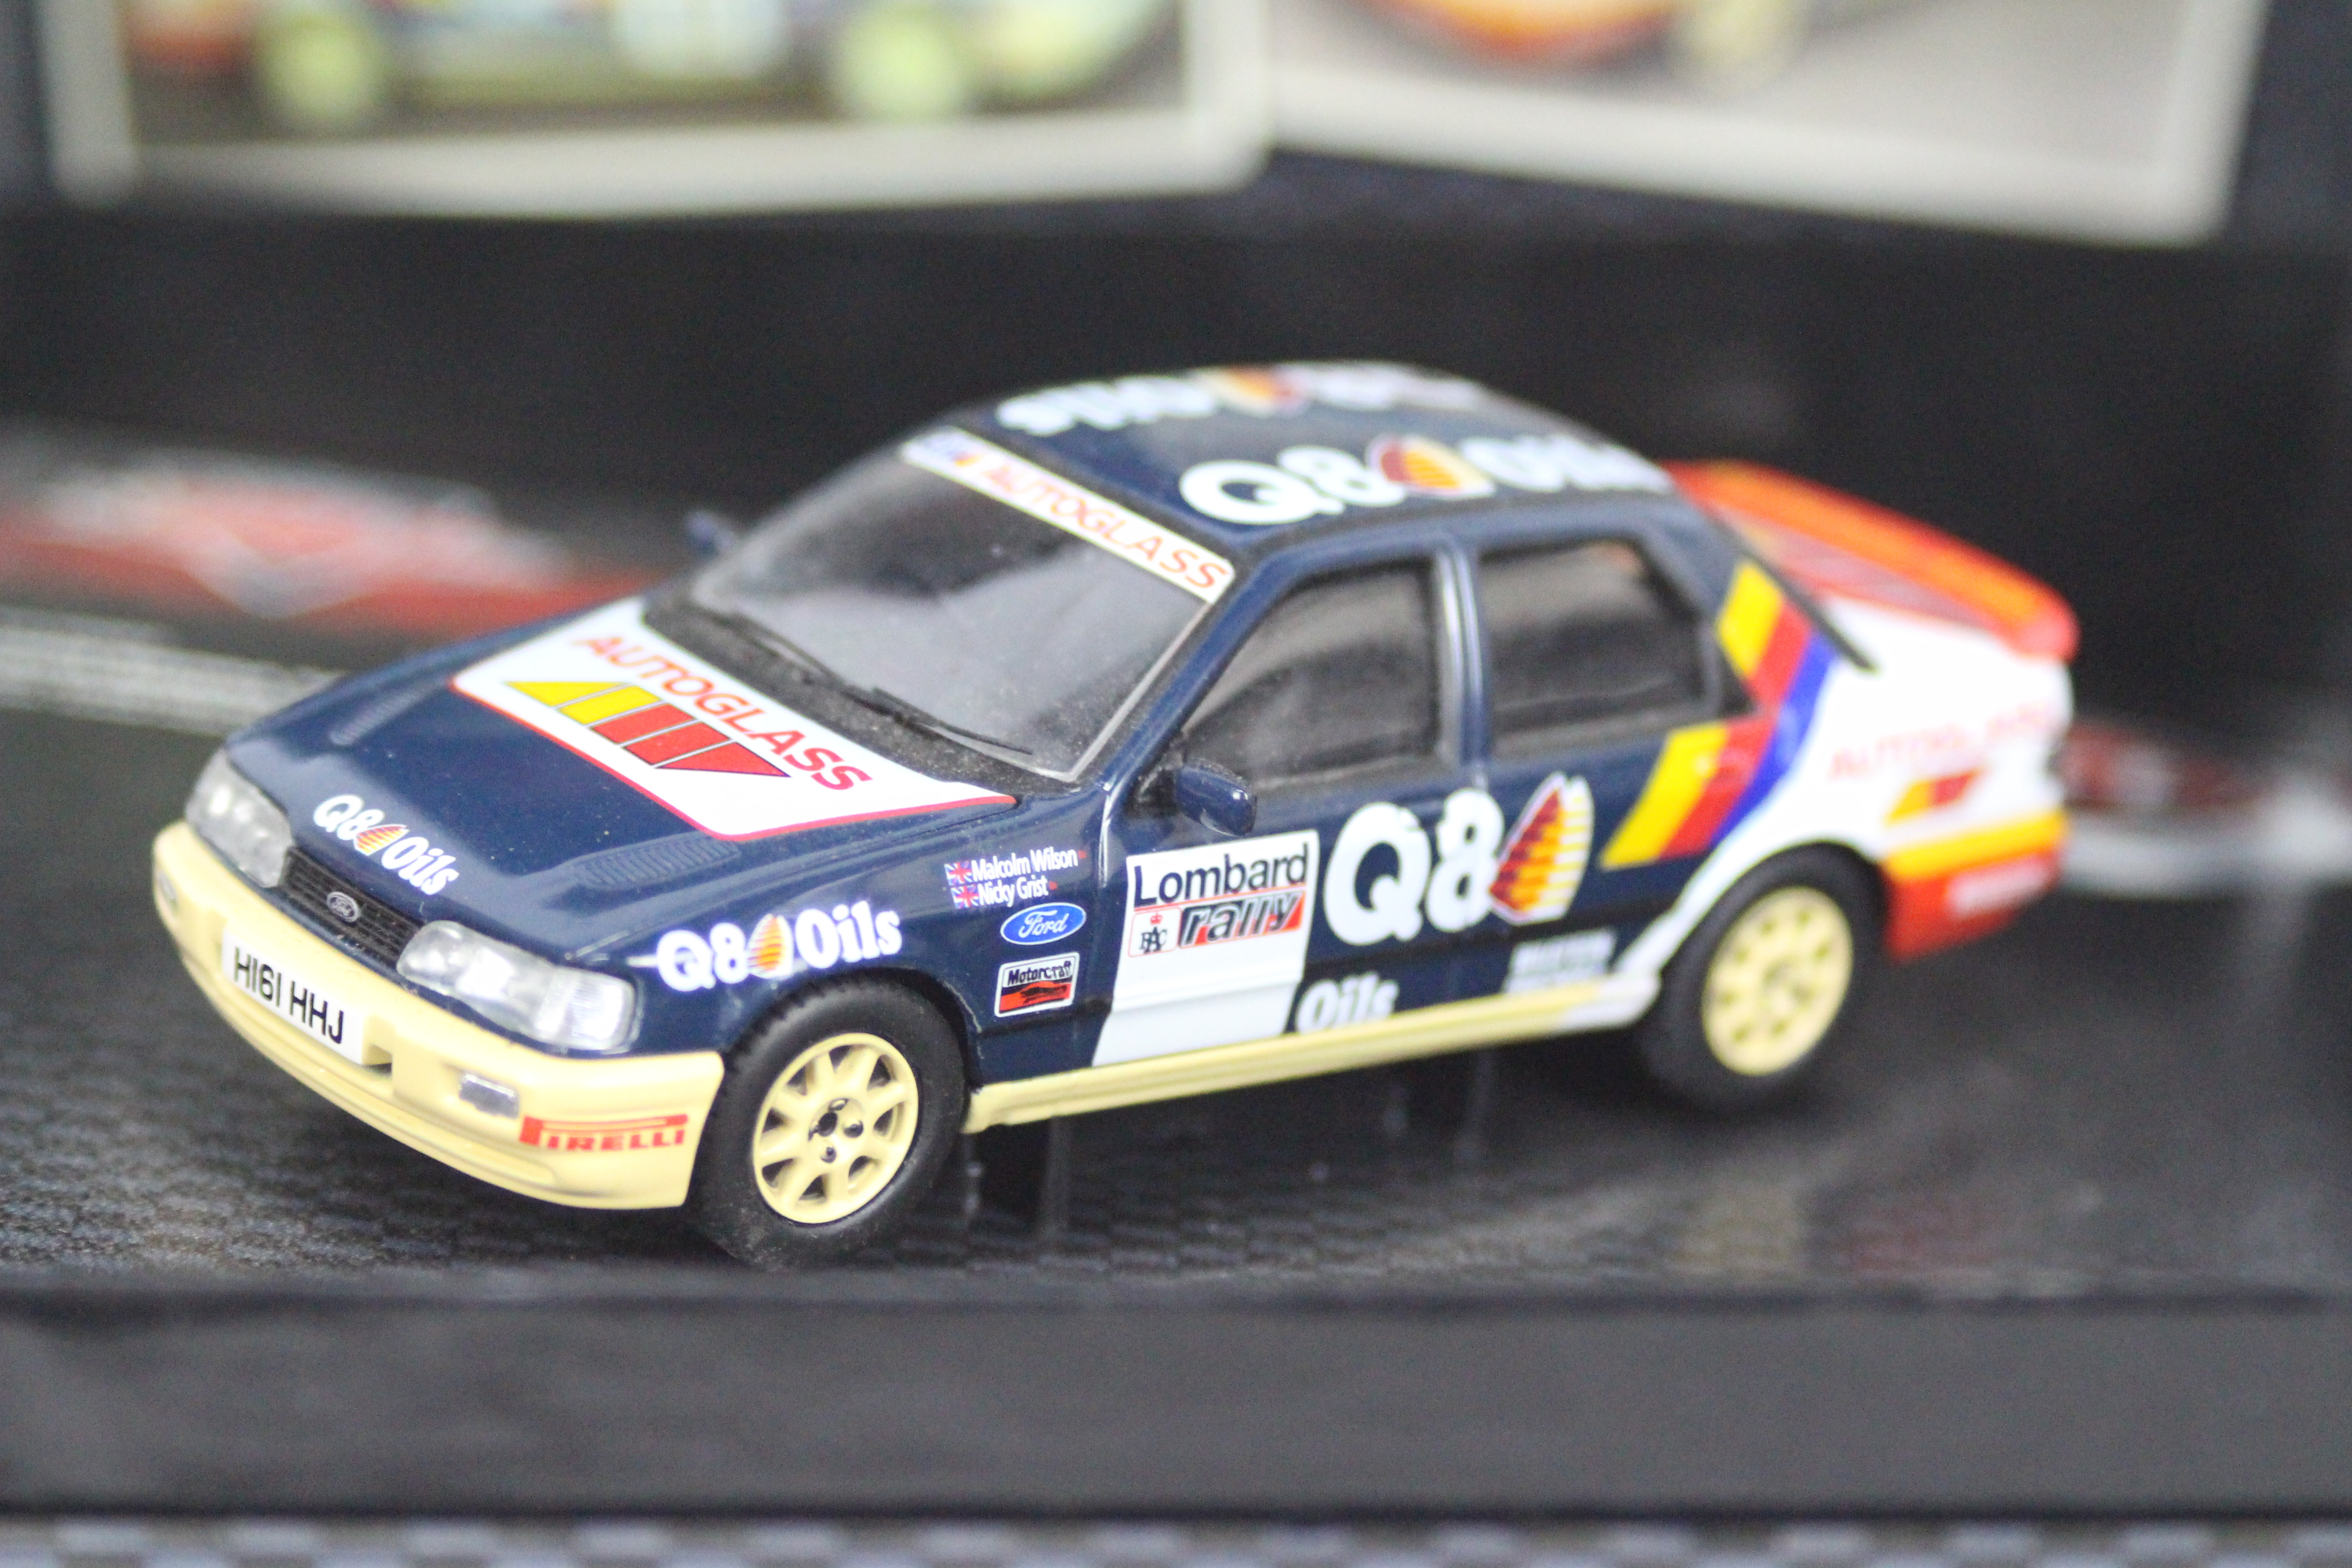 Corgi - 3 x boxed limited edition Ford Sierra Sapphire Cosworth models in 1:43 scale, - Image 2 of 4